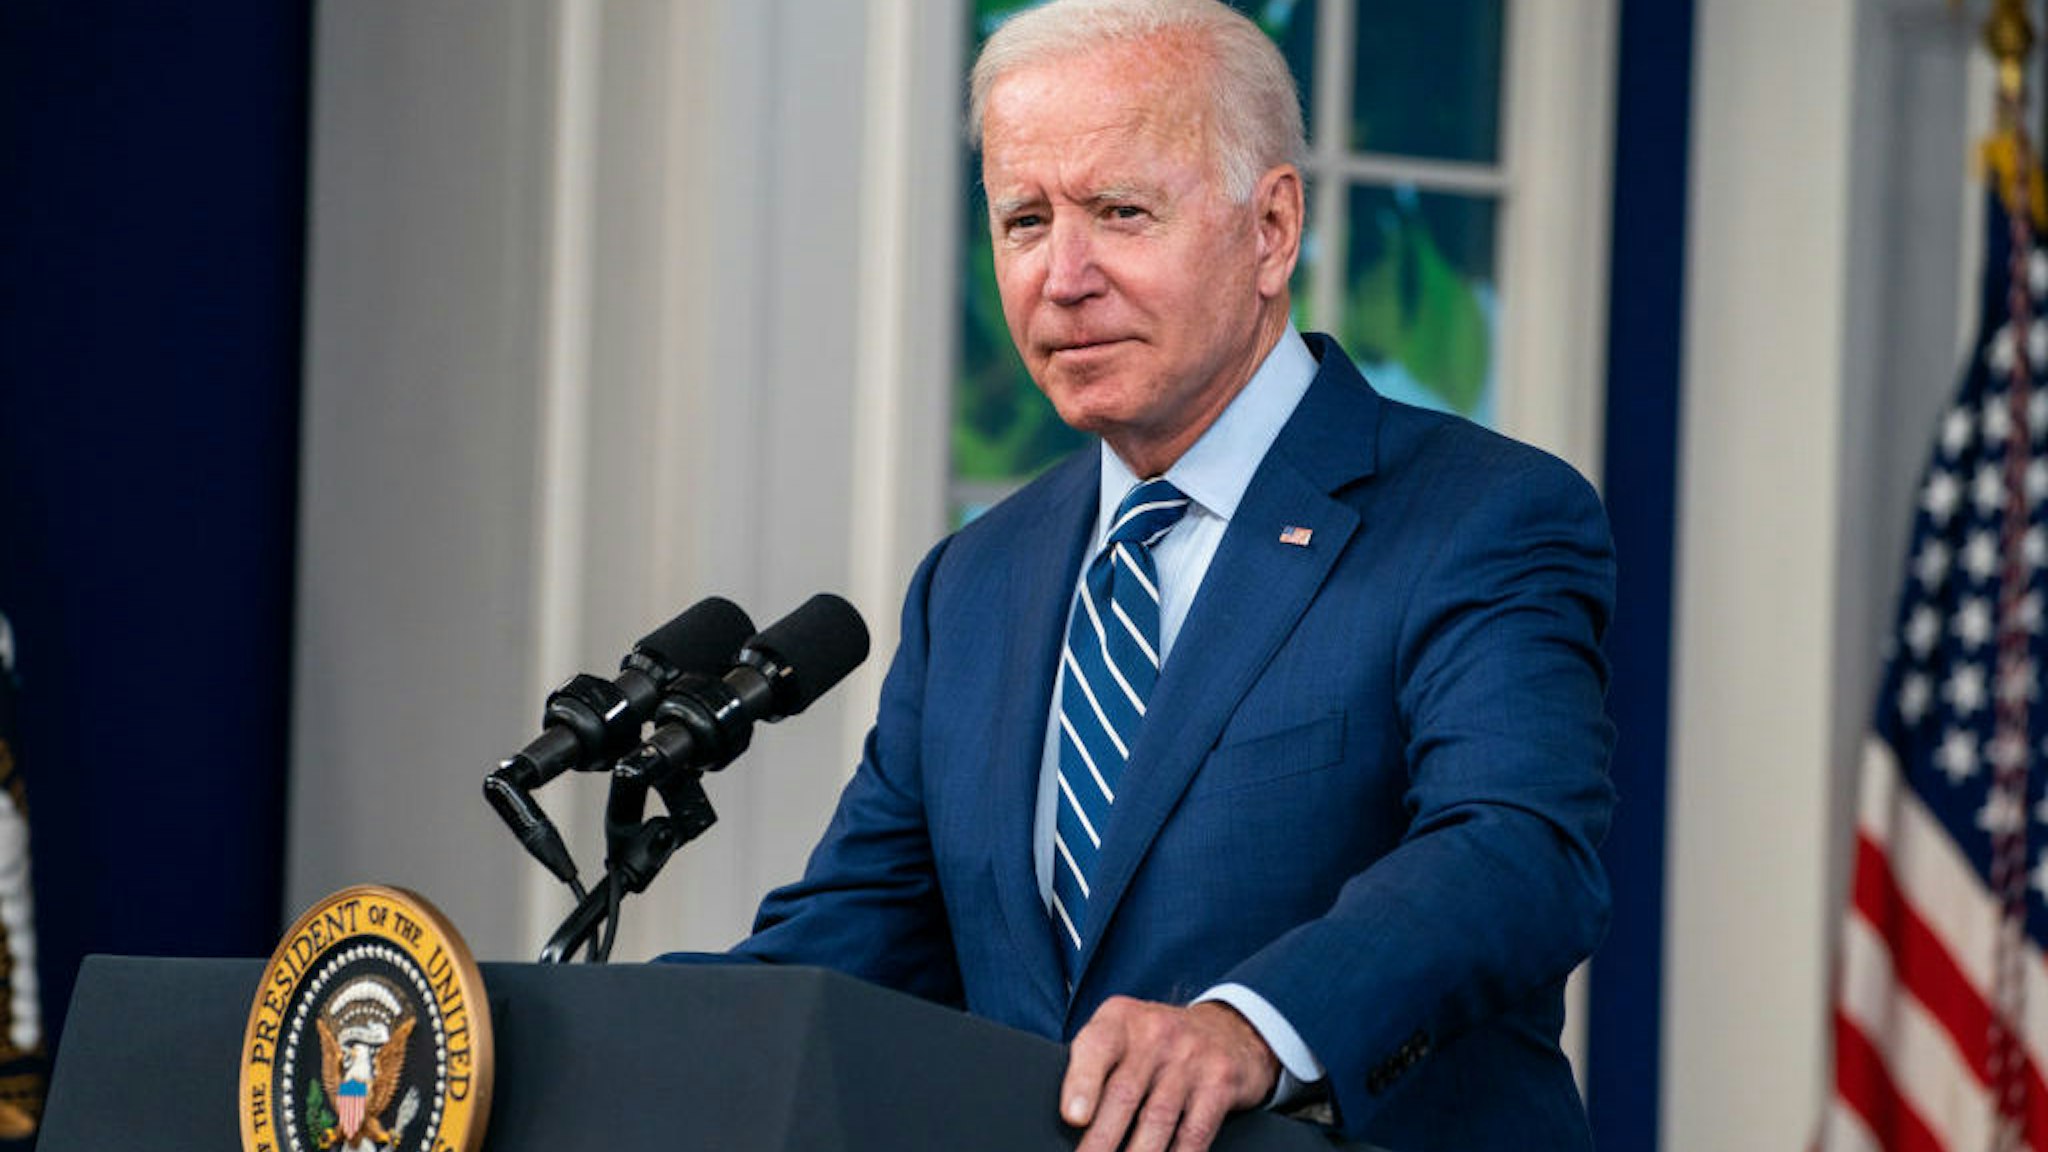 WASHINGTON, DC - SEPTEMBER 27: President Joe Biden speaks before receiving a booster vaccination shot for CoVID19 in the South Court Auditorium of the Eisenhower Executive Office Building on the White House Complex on Monday, Sept. 27, 2021 in Washington, DC. (Kent Nishimura / Los Angeles Times via Getty Images)